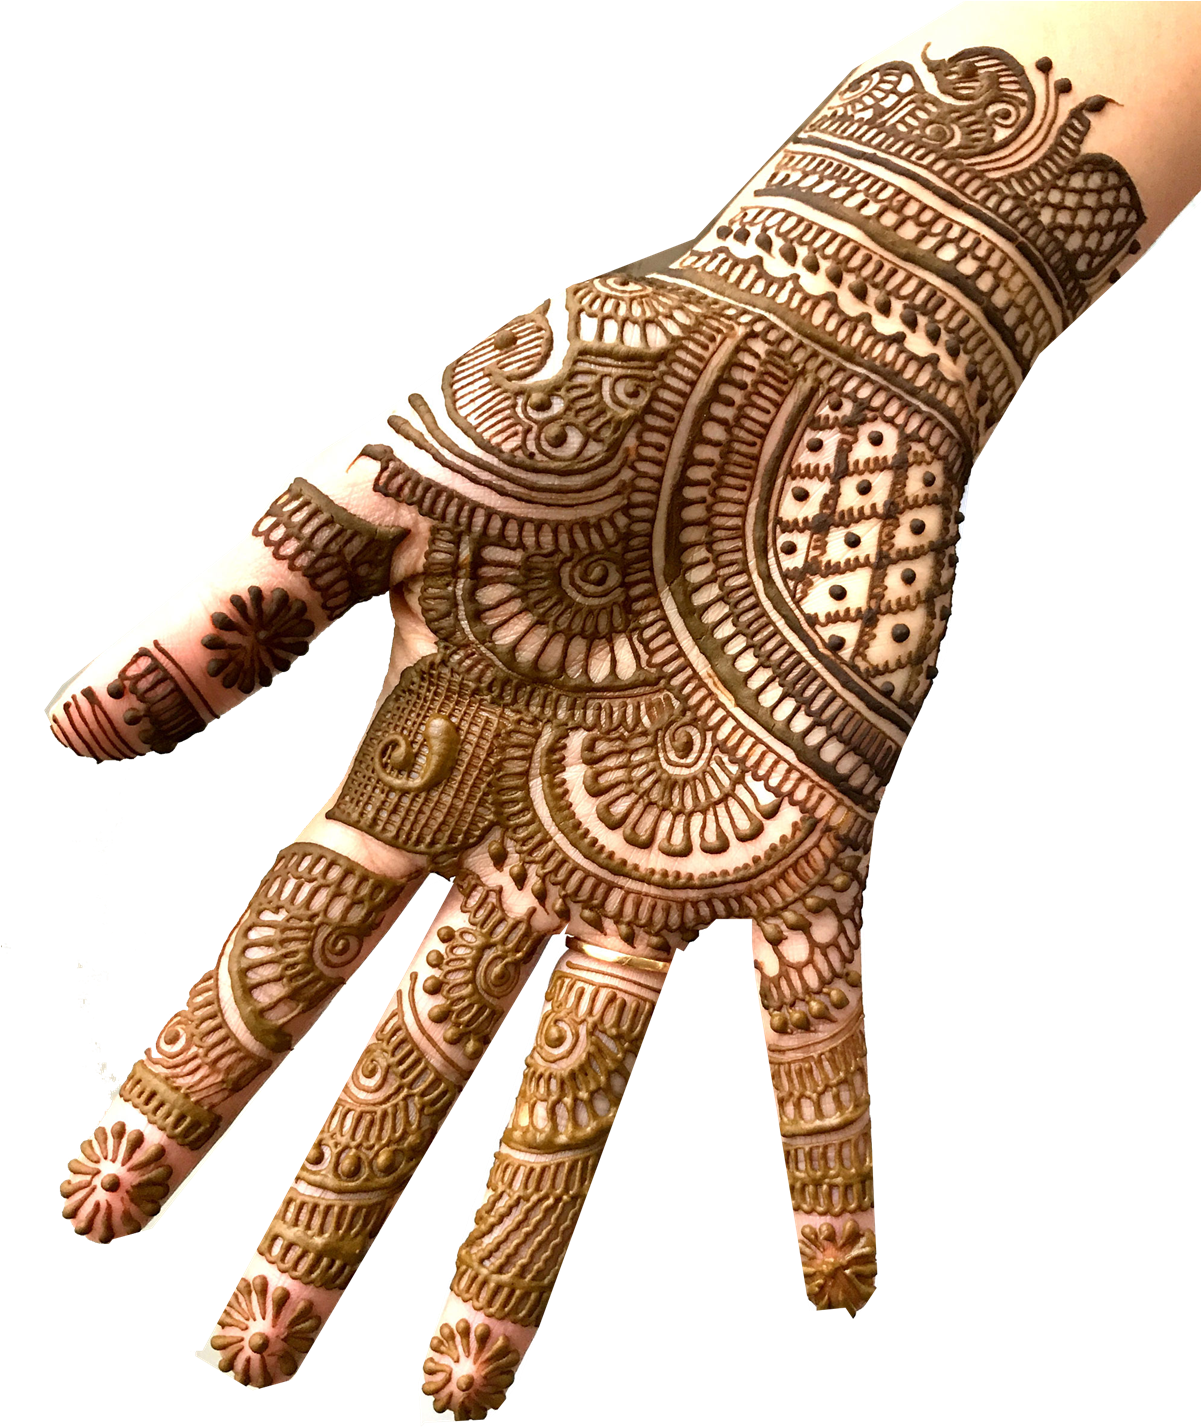 A Hand With Henna Designs On It